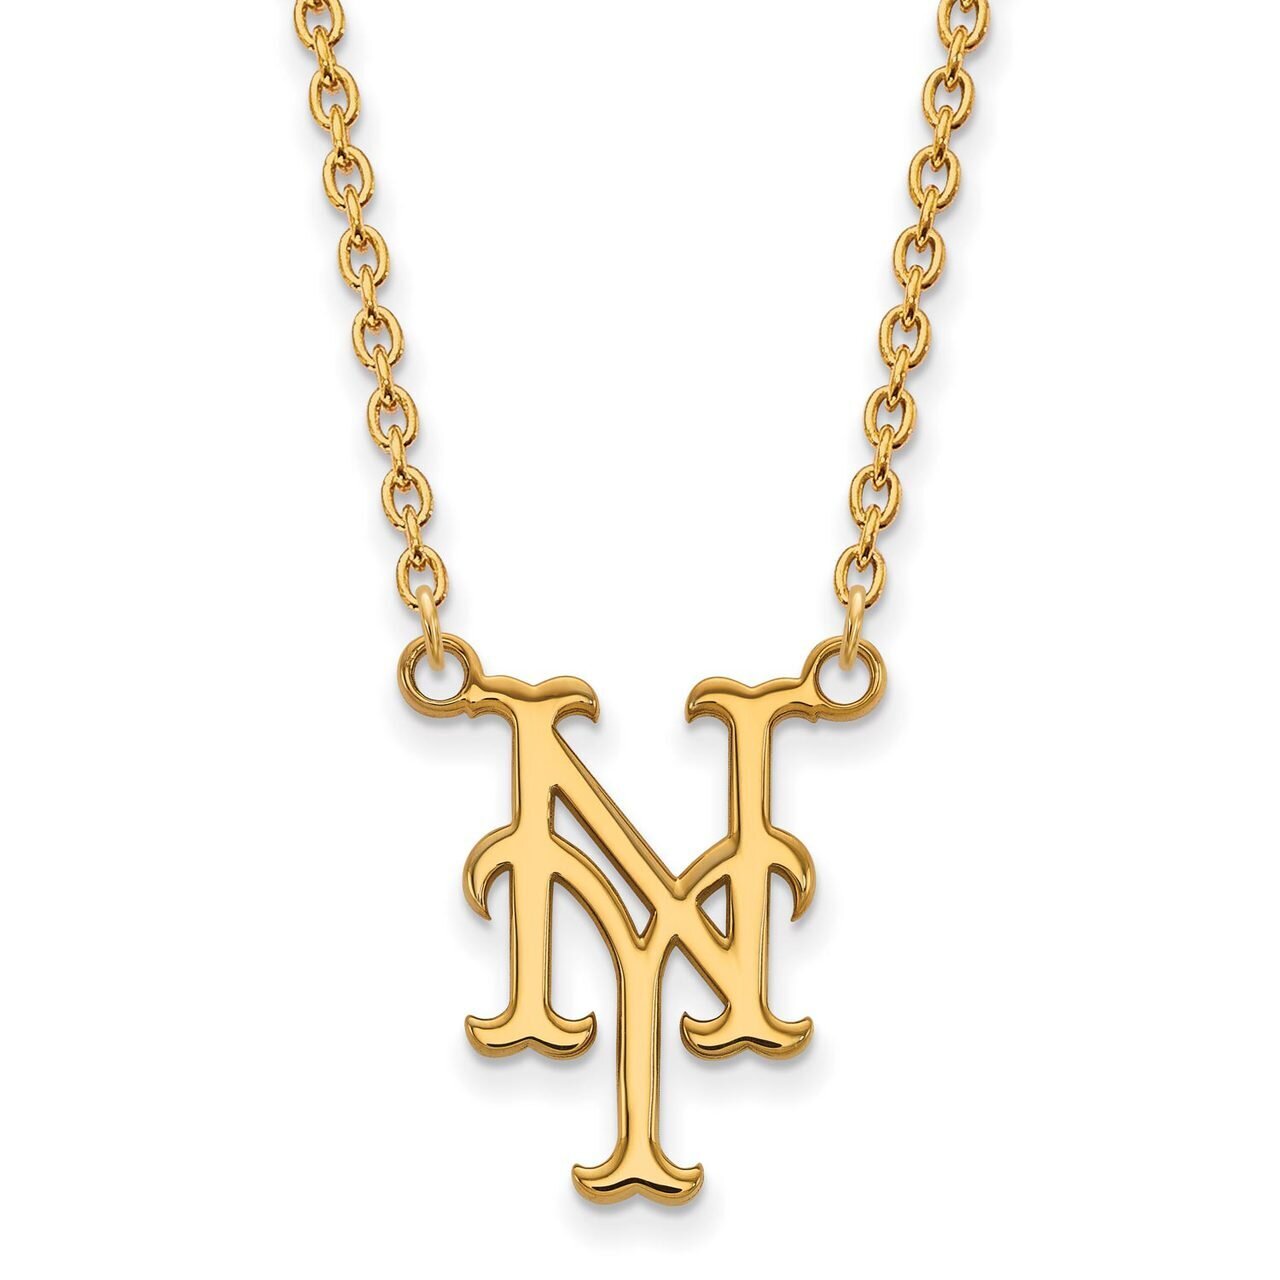 New York Mets Large Pendant with Chain Necklace 10k Yellow Gold 1Y009MET-18